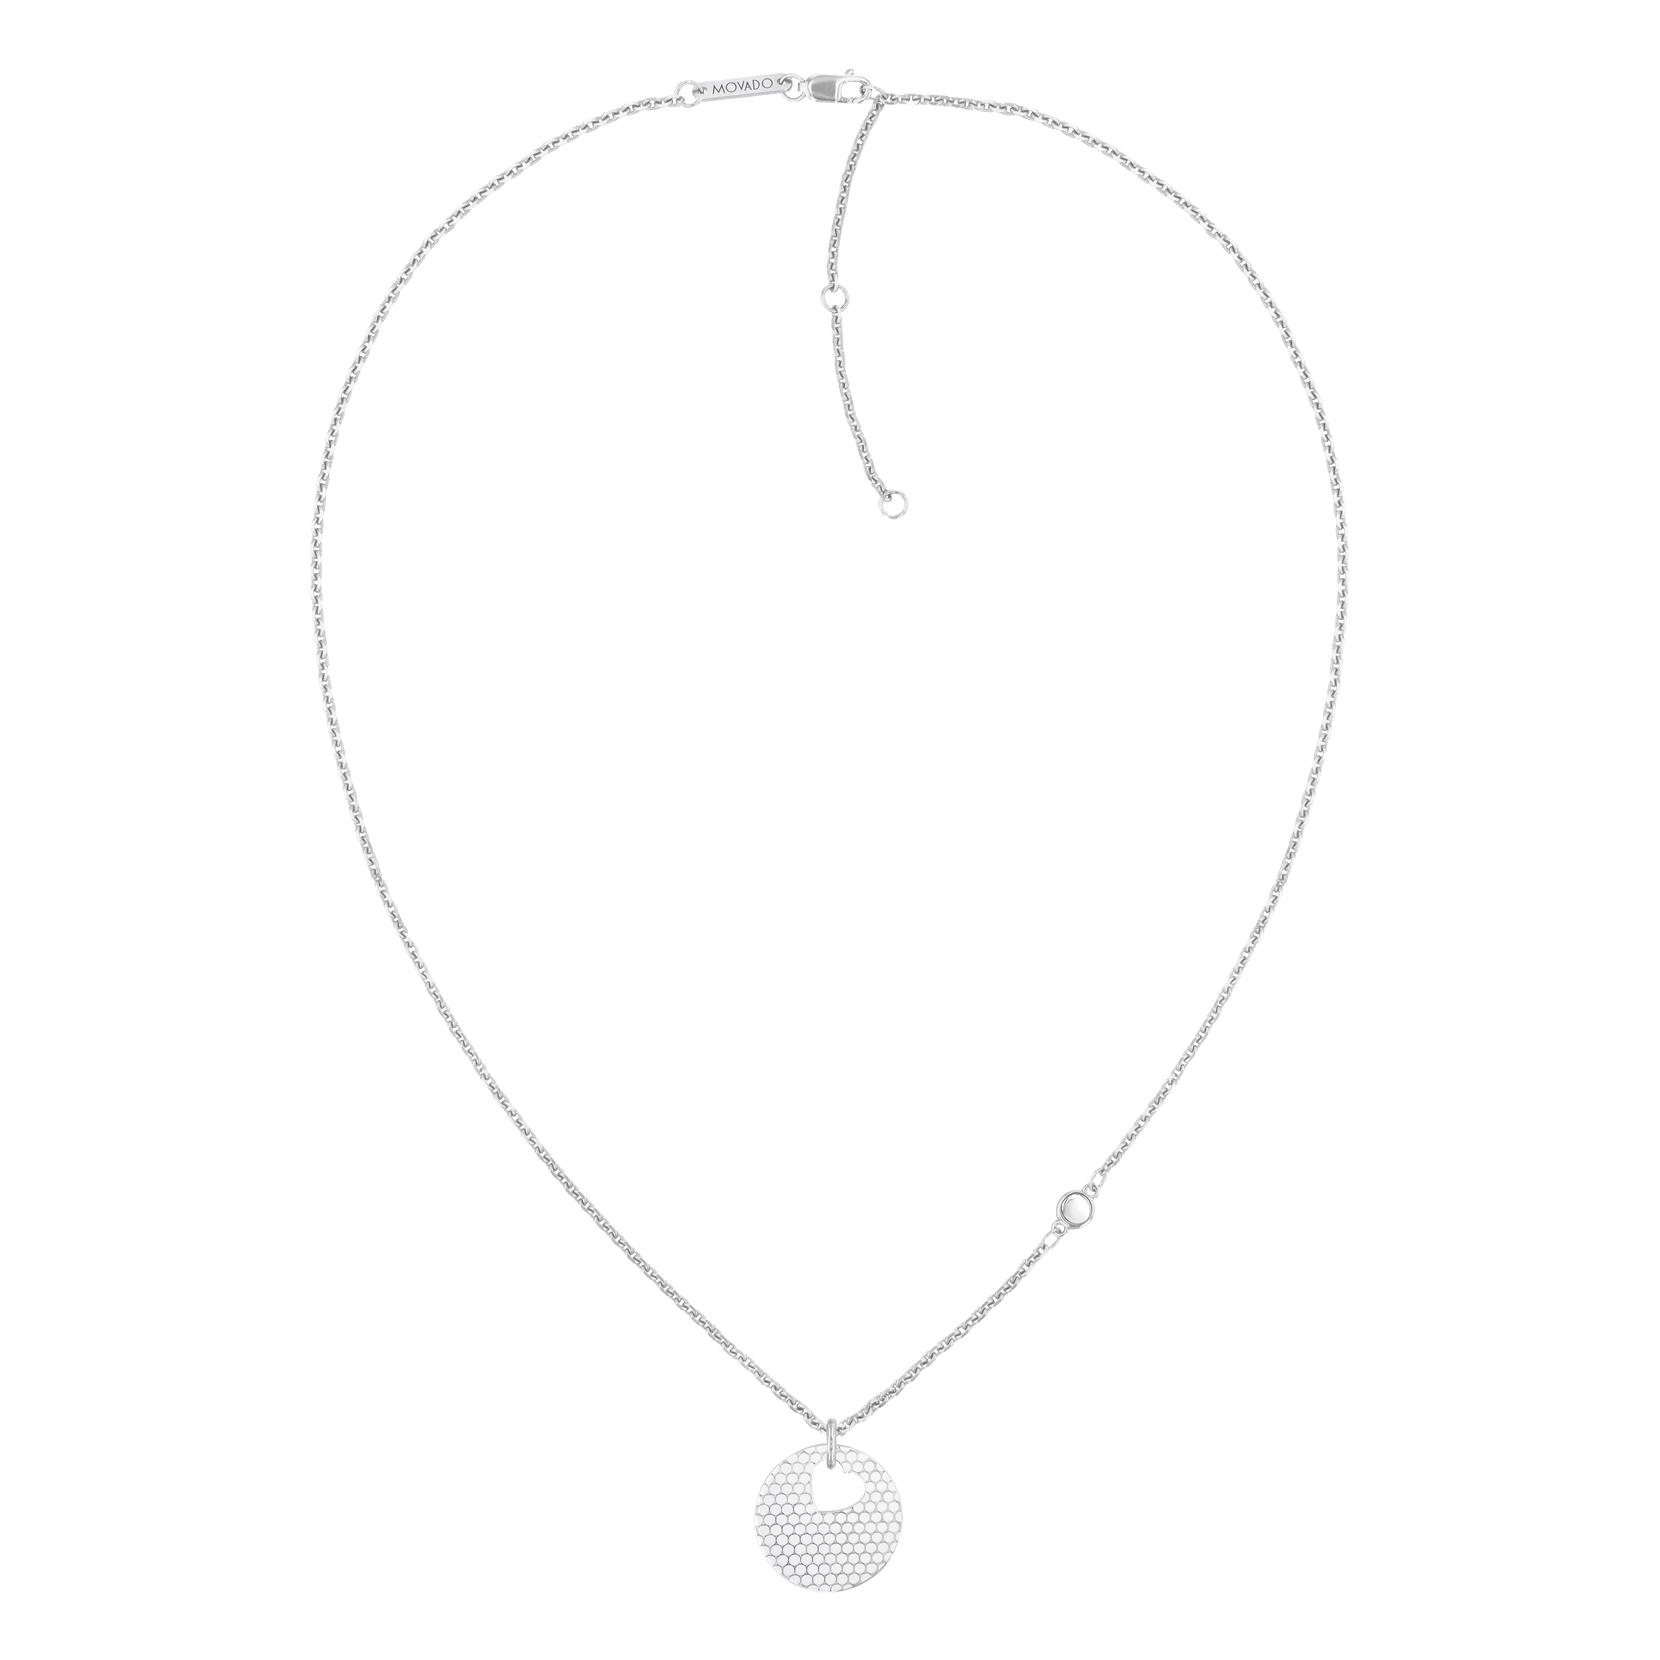 Movado Heart on Chain Necklace